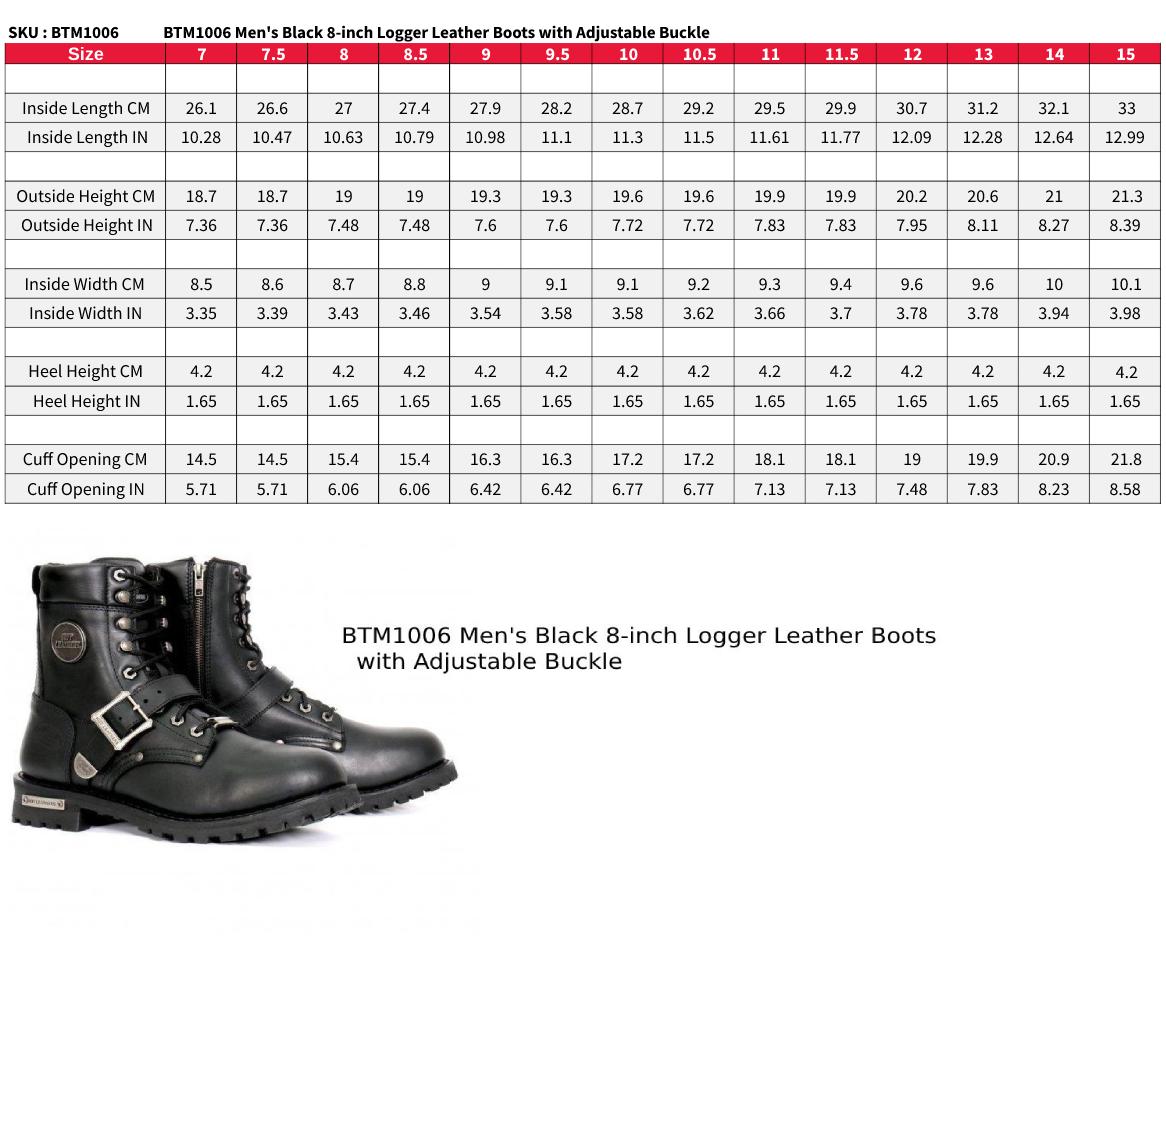 Hot Leathers BTM1006 Men's Black 8-inch Logger Leather Boots with Adjustable Buckle